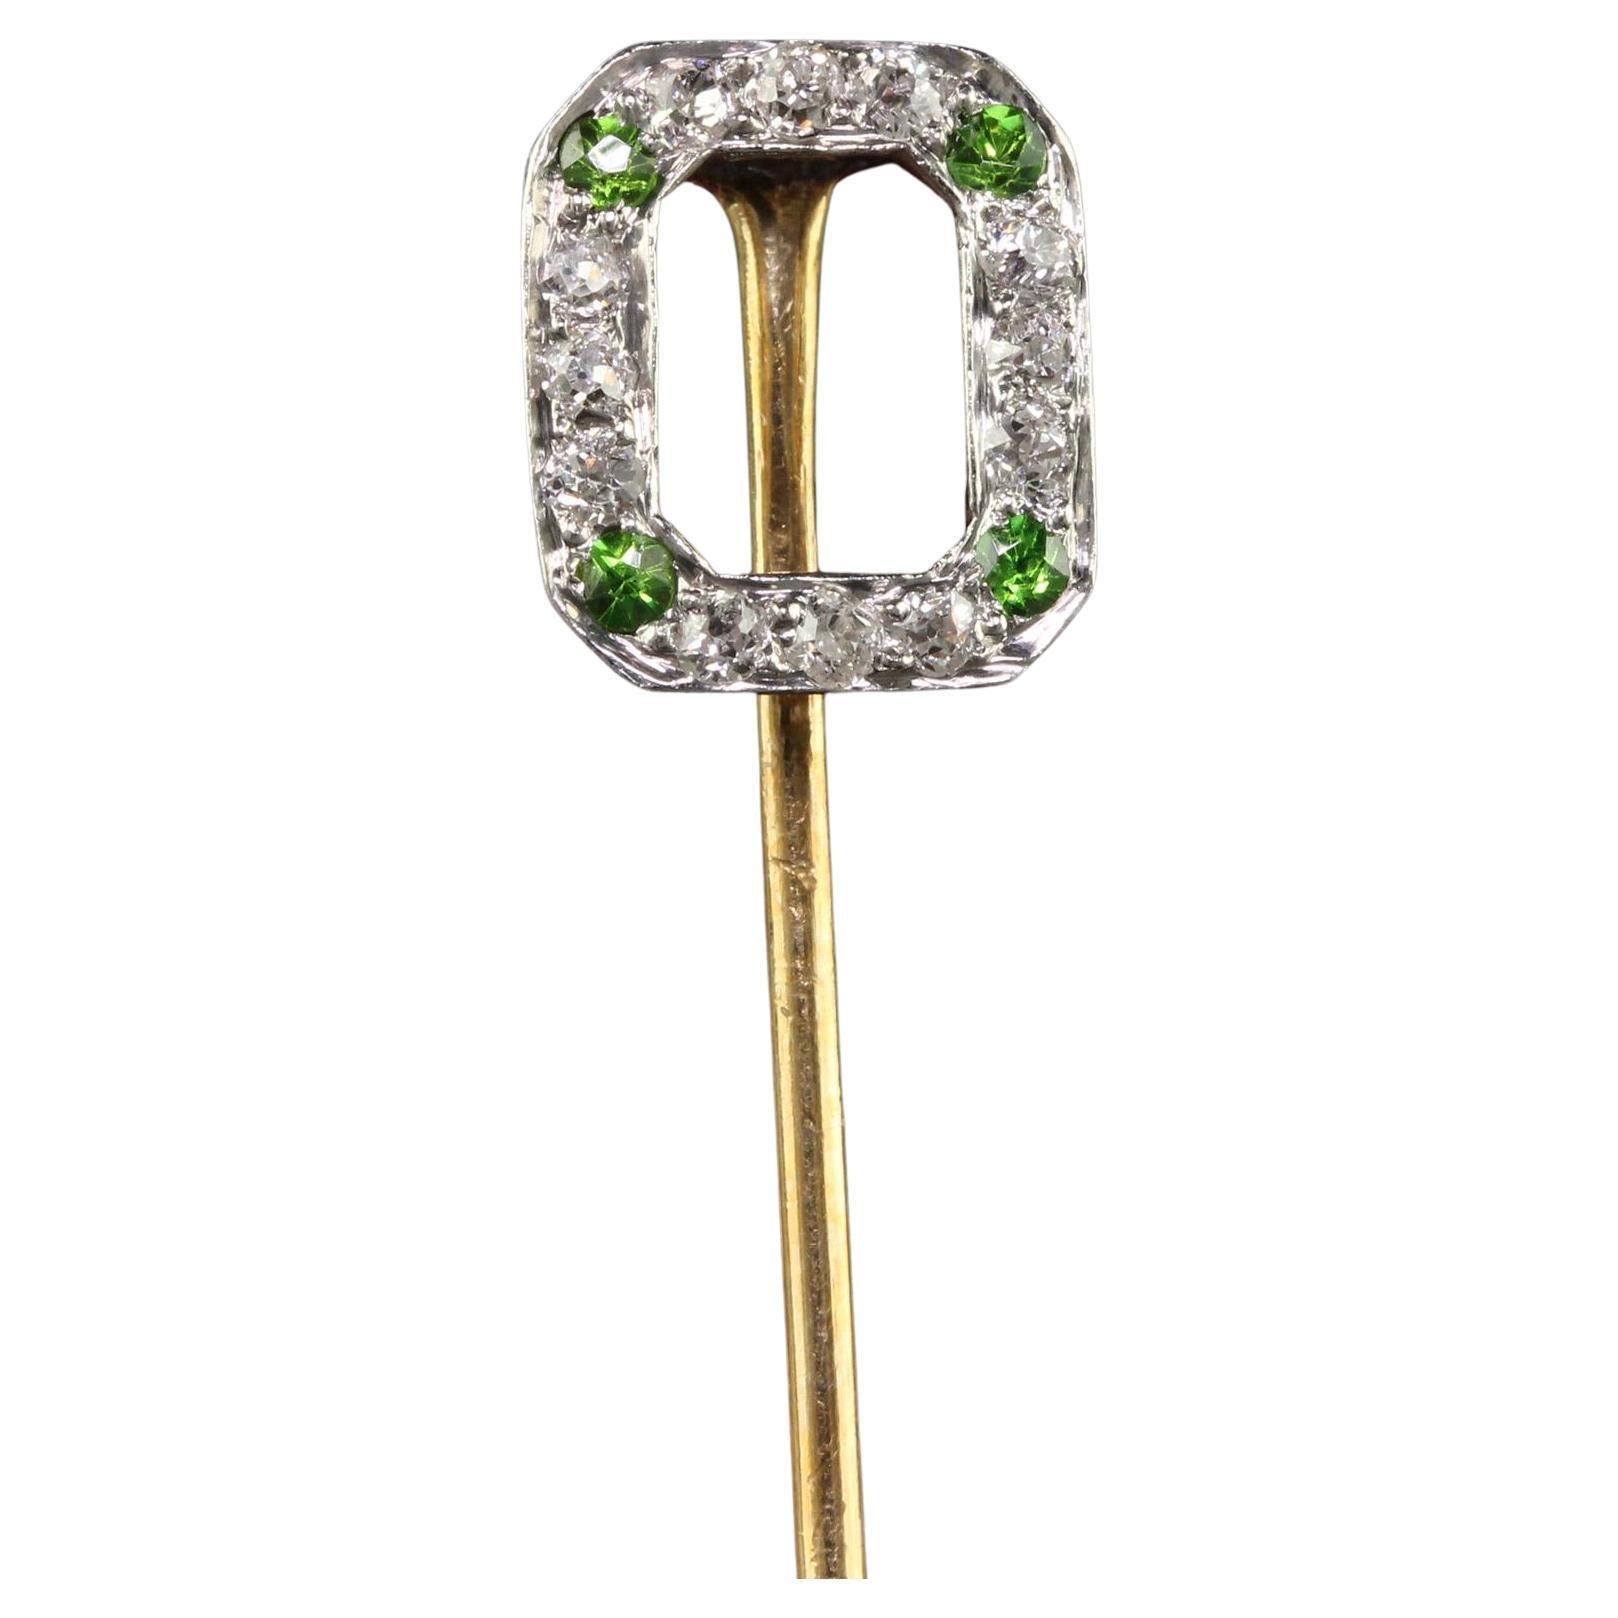 Antique Art Deco 18K Yellow Gold Old Cut Diamond and Demantoid Stick Pin For Sale